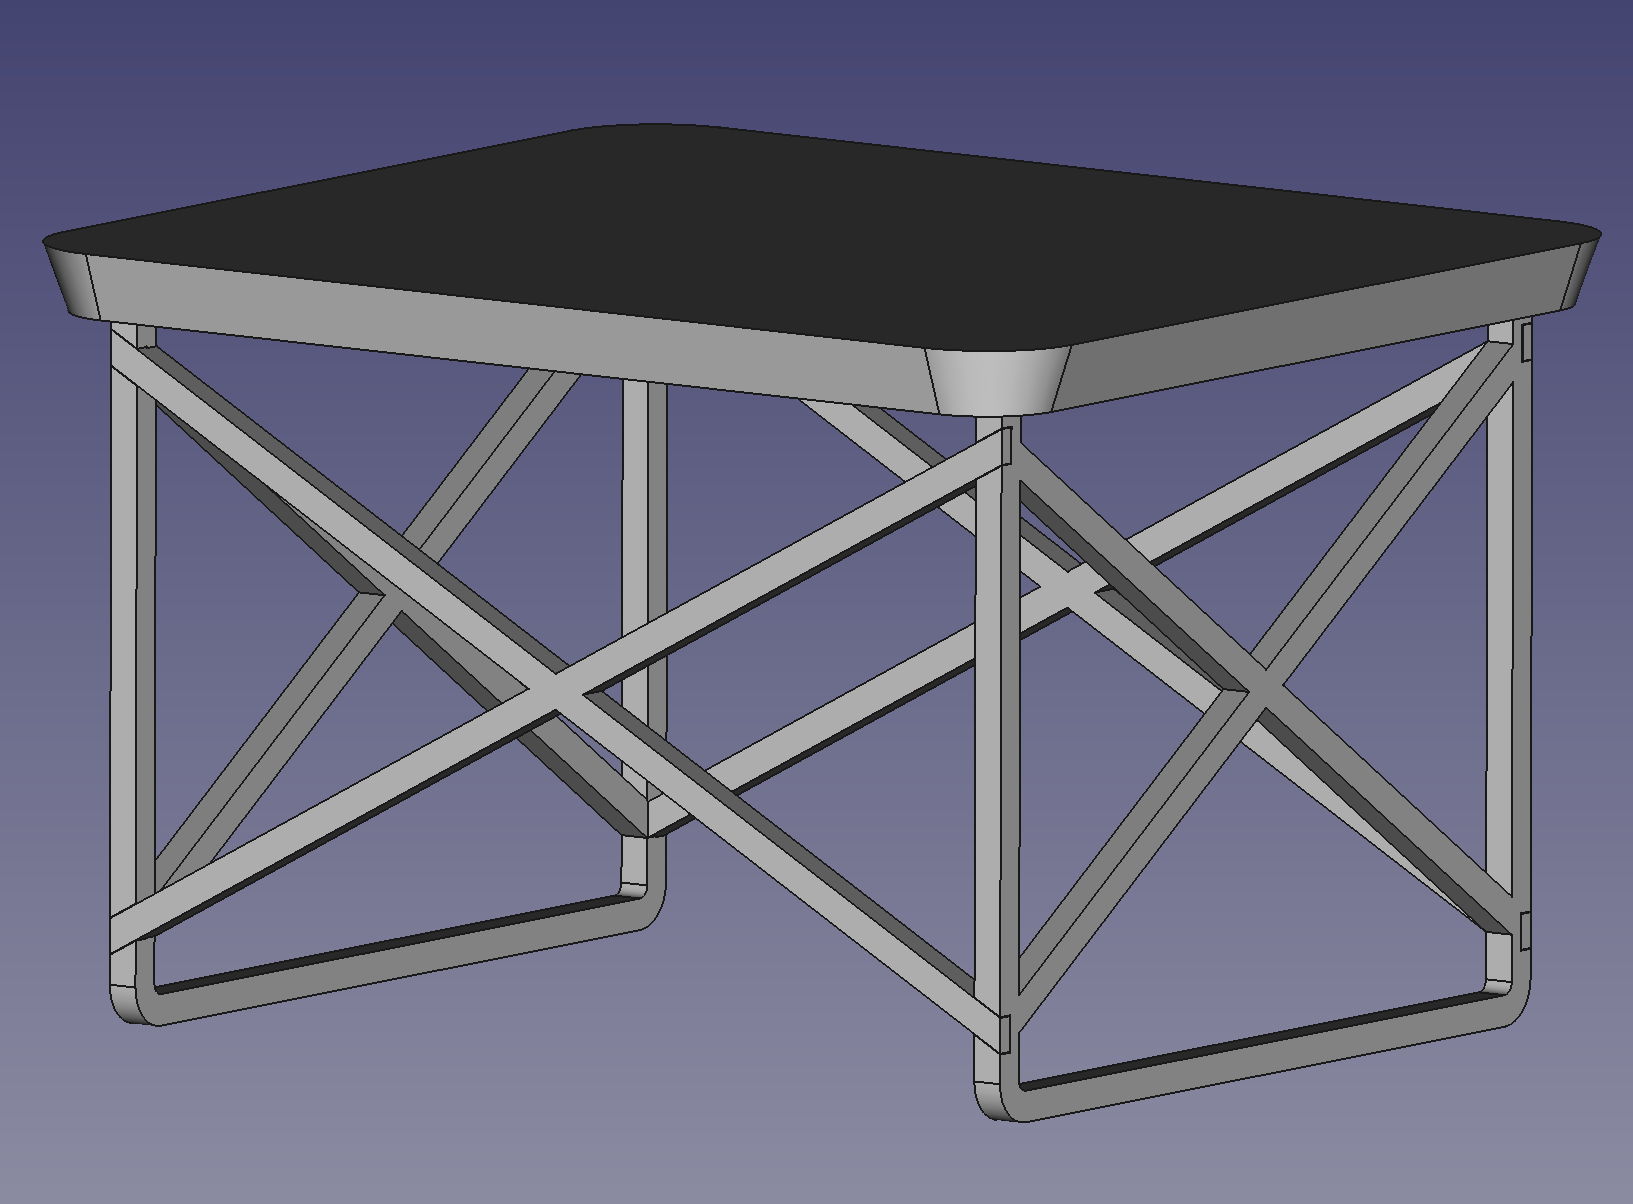 Eames LTR Side Table adapted 3D printable version - WIP